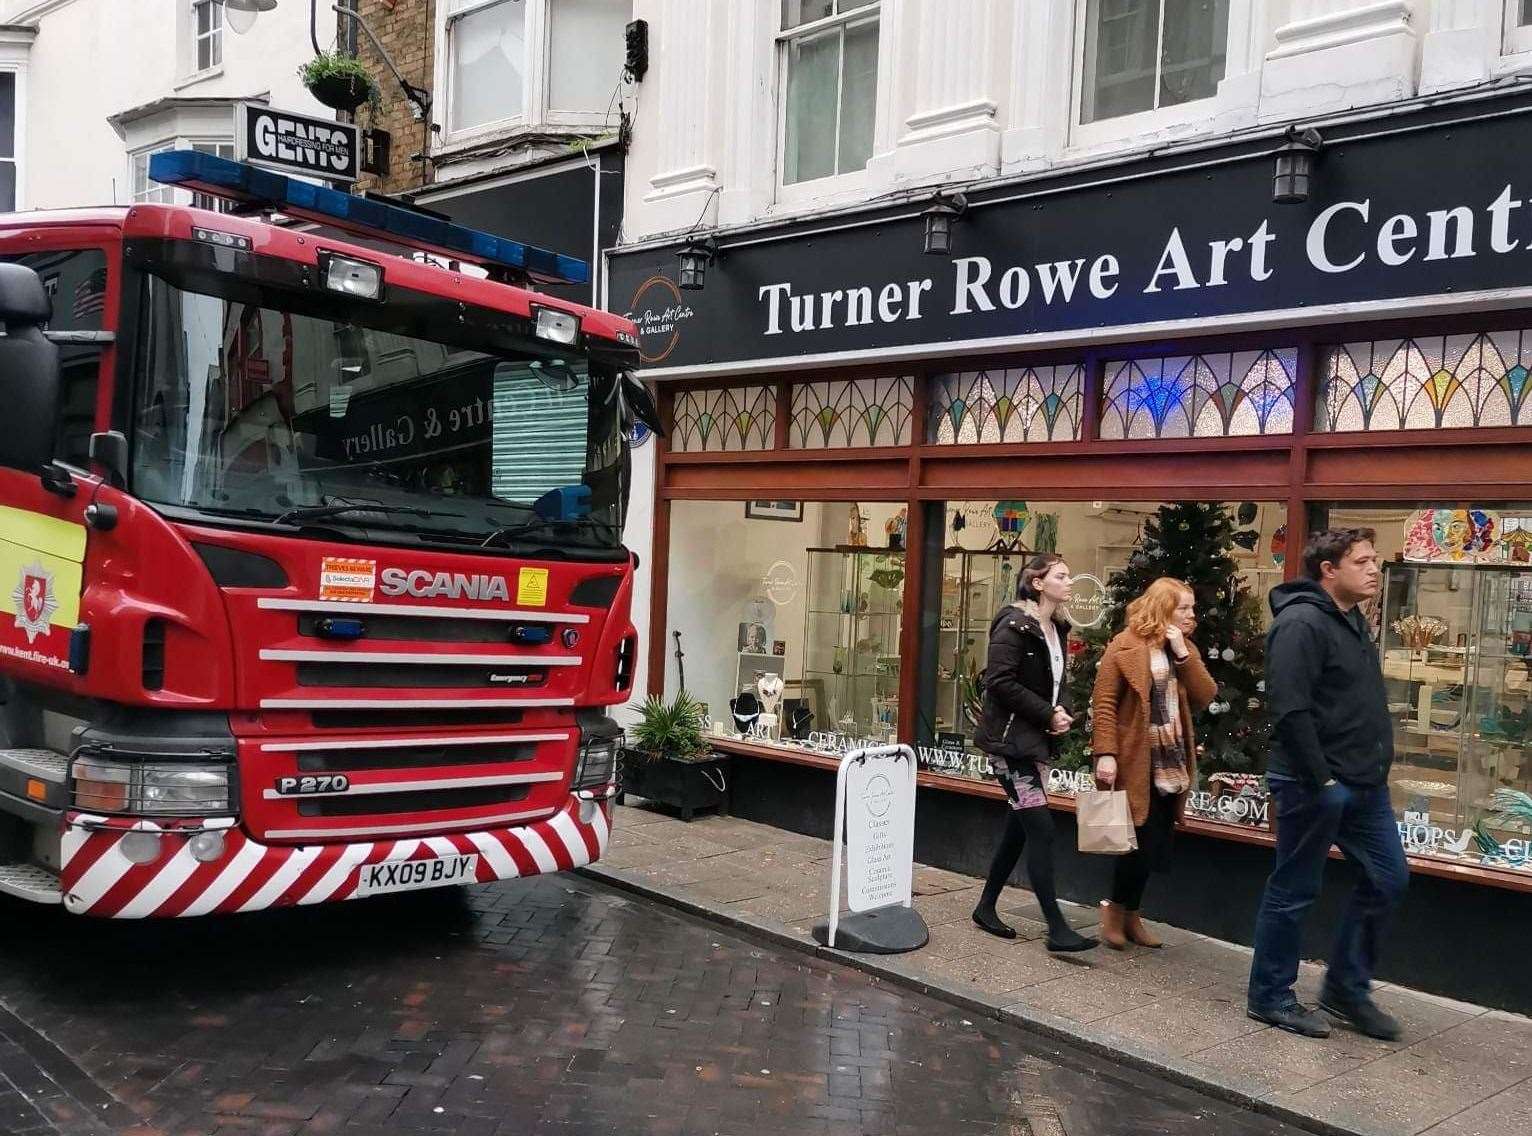 Harbour Street has now been opened after the suspected gas leak. Picture: Turner Rowe Art Centre & Gallery